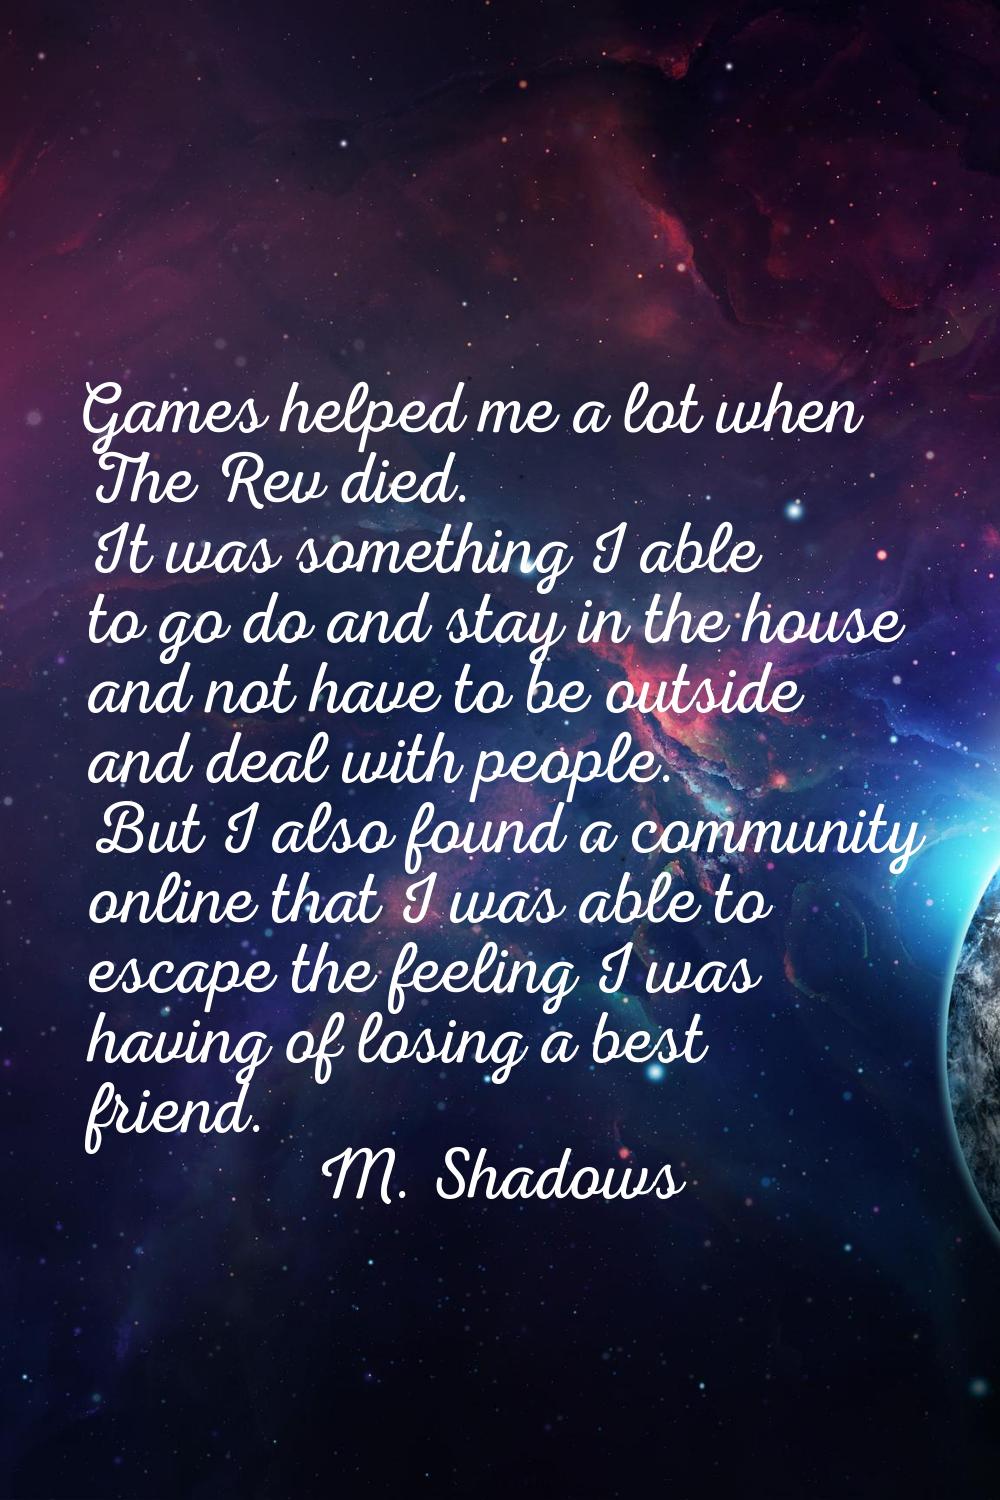 Games helped me a lot when The Rev died. It was something I able to go do and stay in the house and